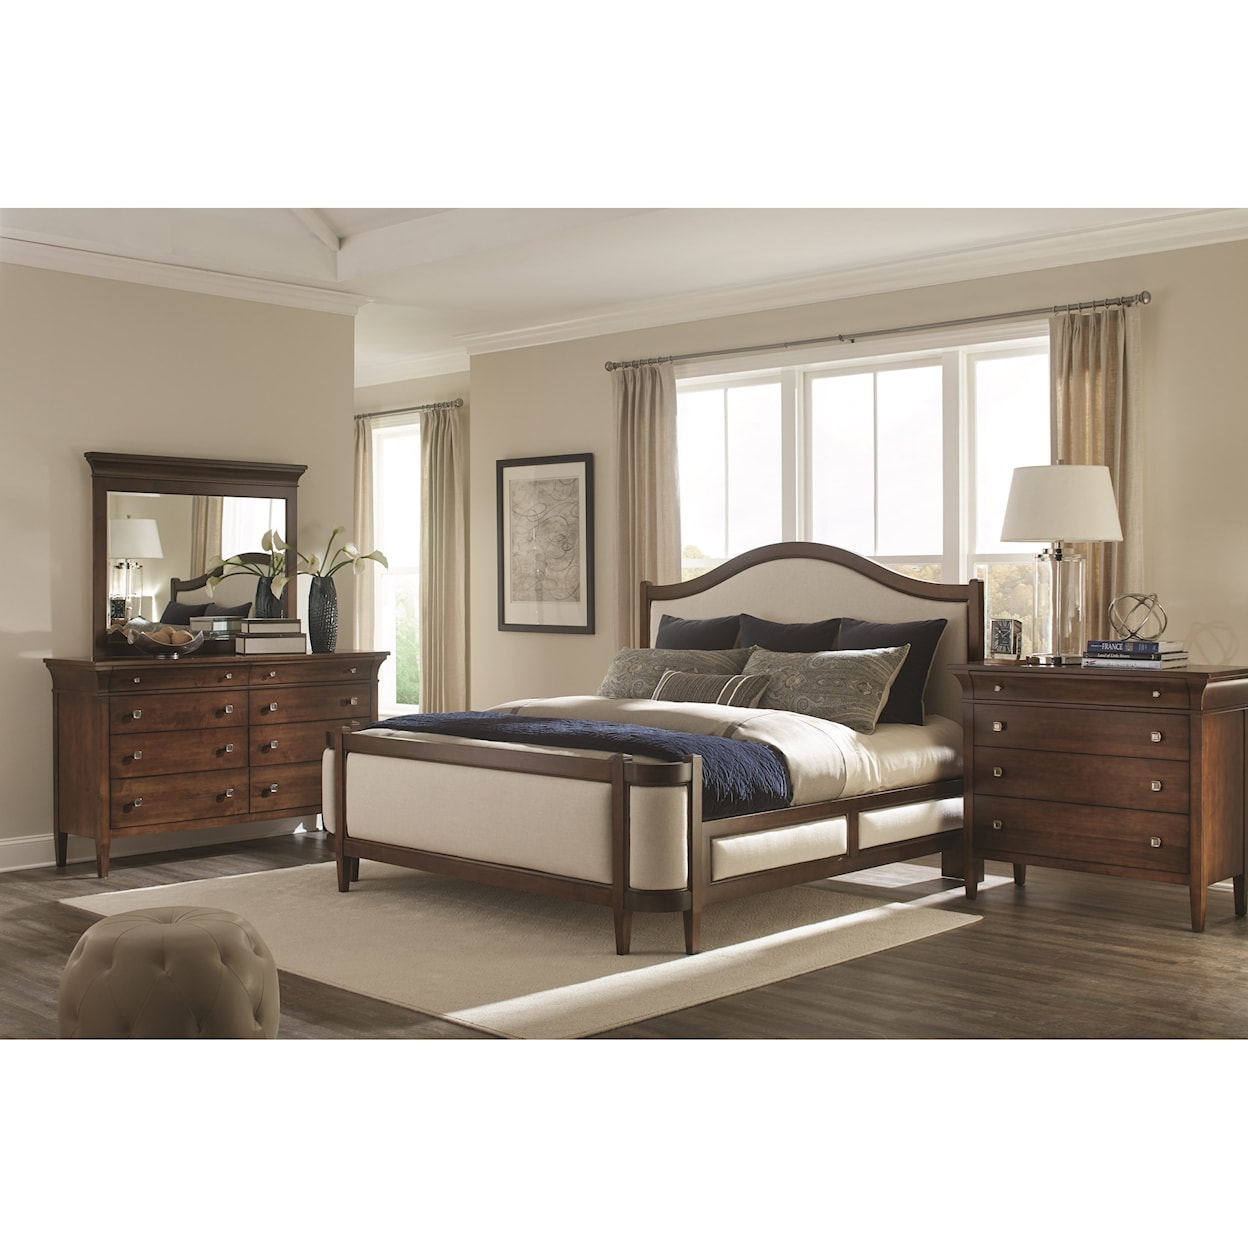 Durham Prominence King Bedroom Group